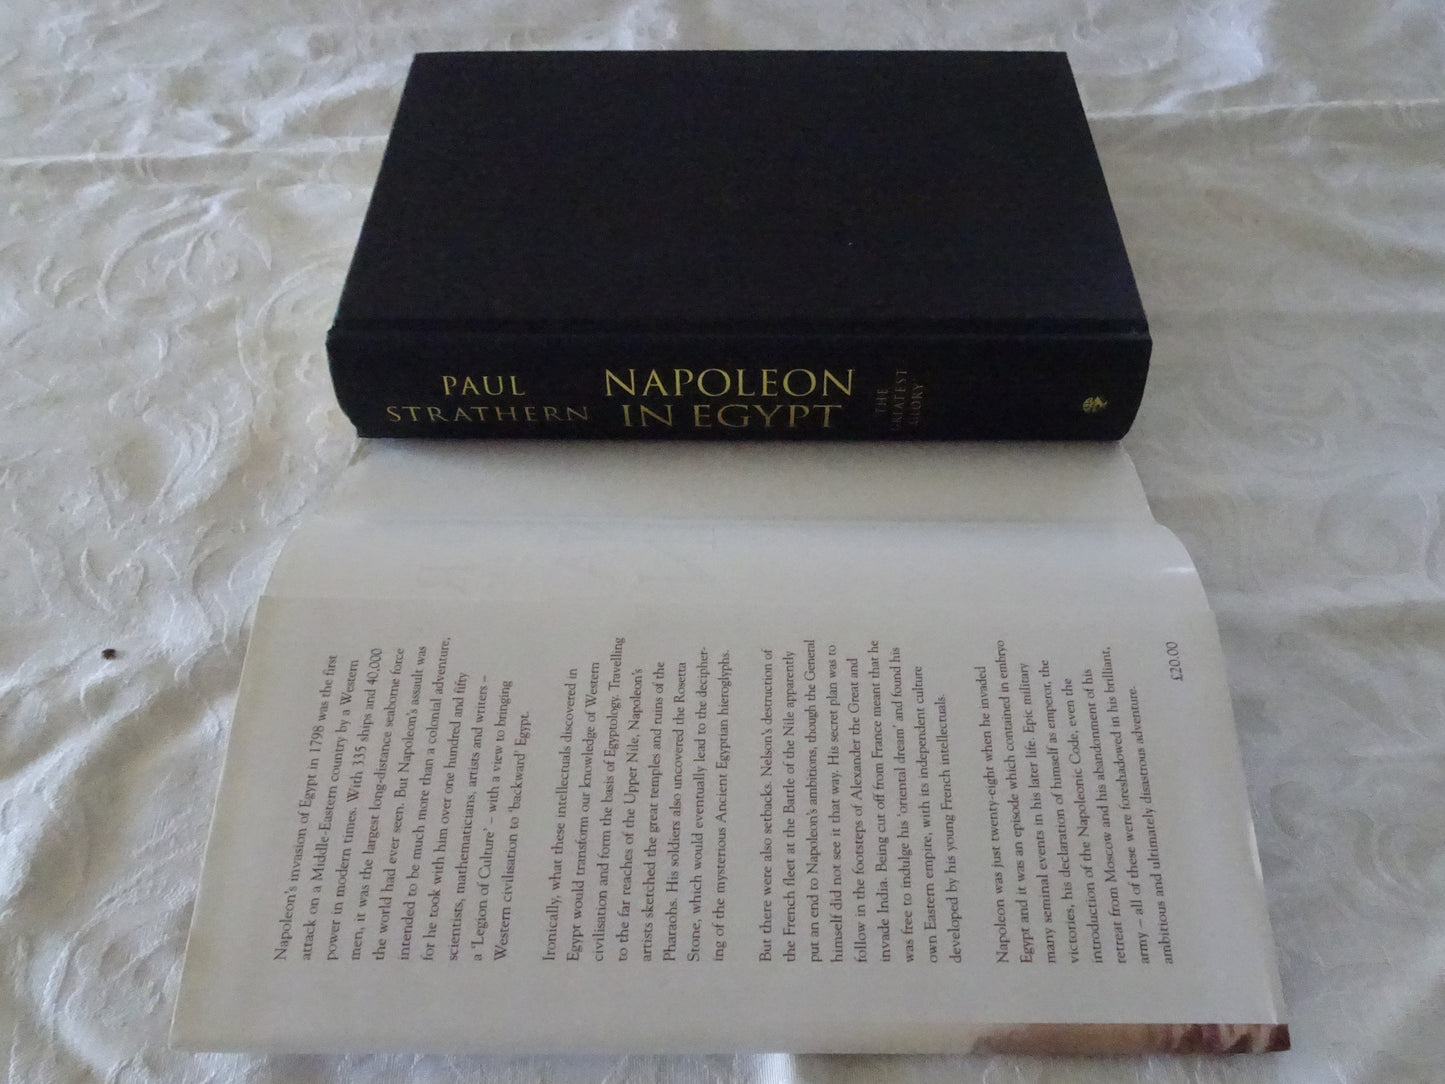 Napoleon In Egypt by Paul Strathern